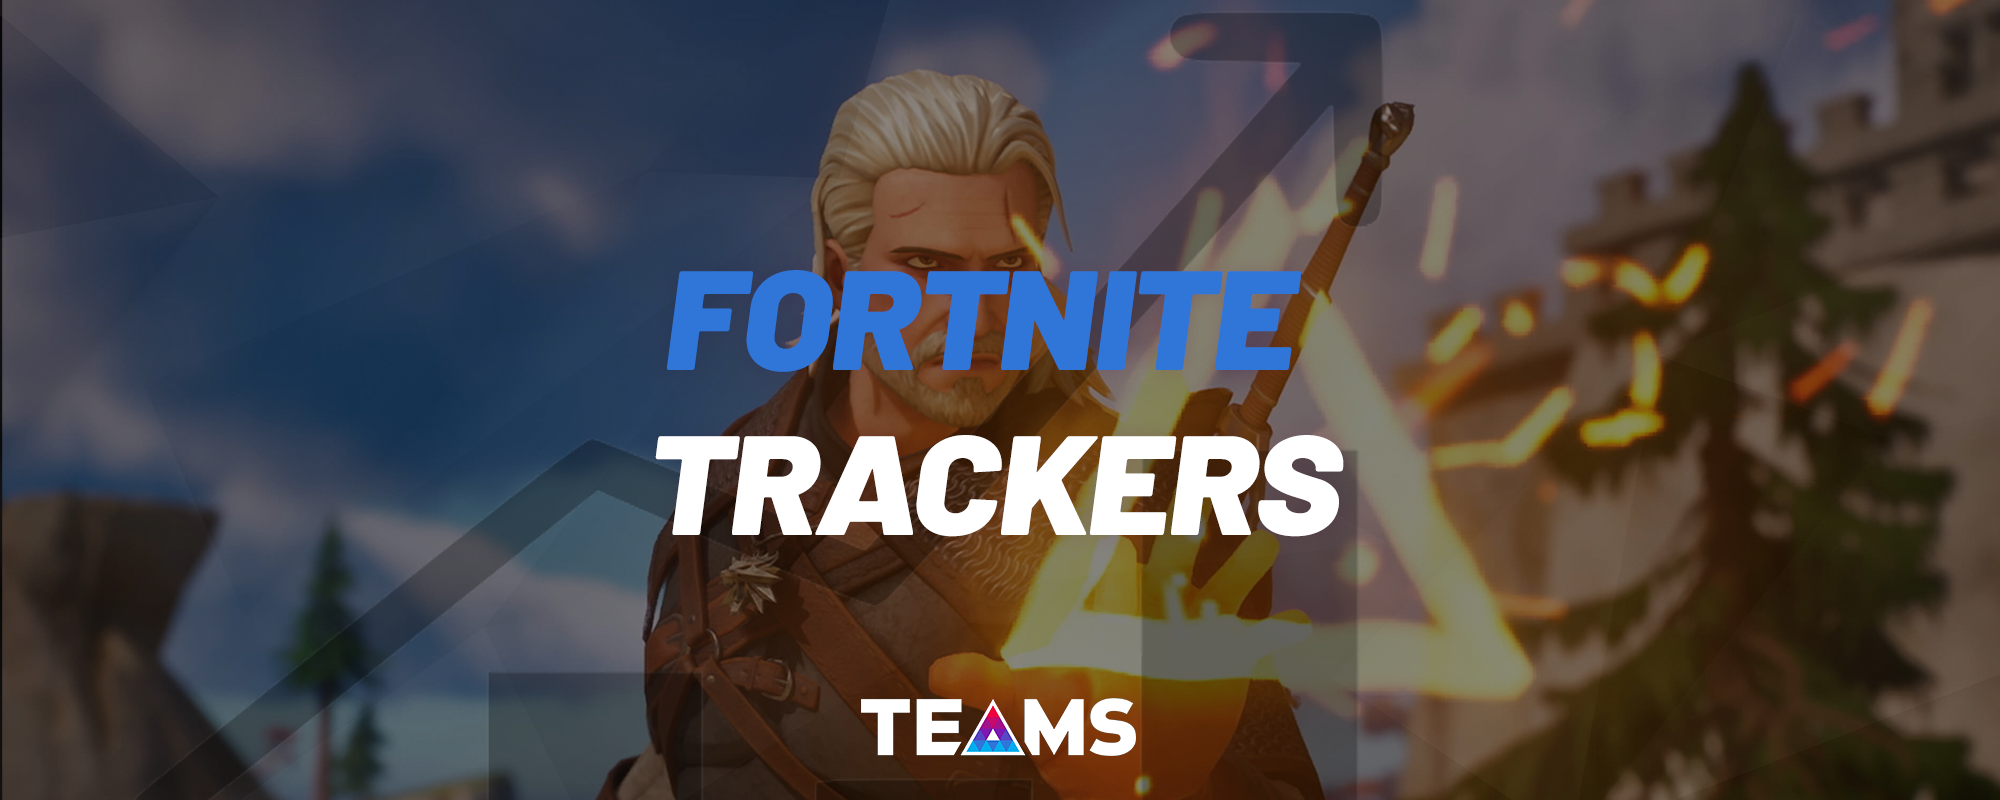 Find your stats for your favorite games - Tracker Network